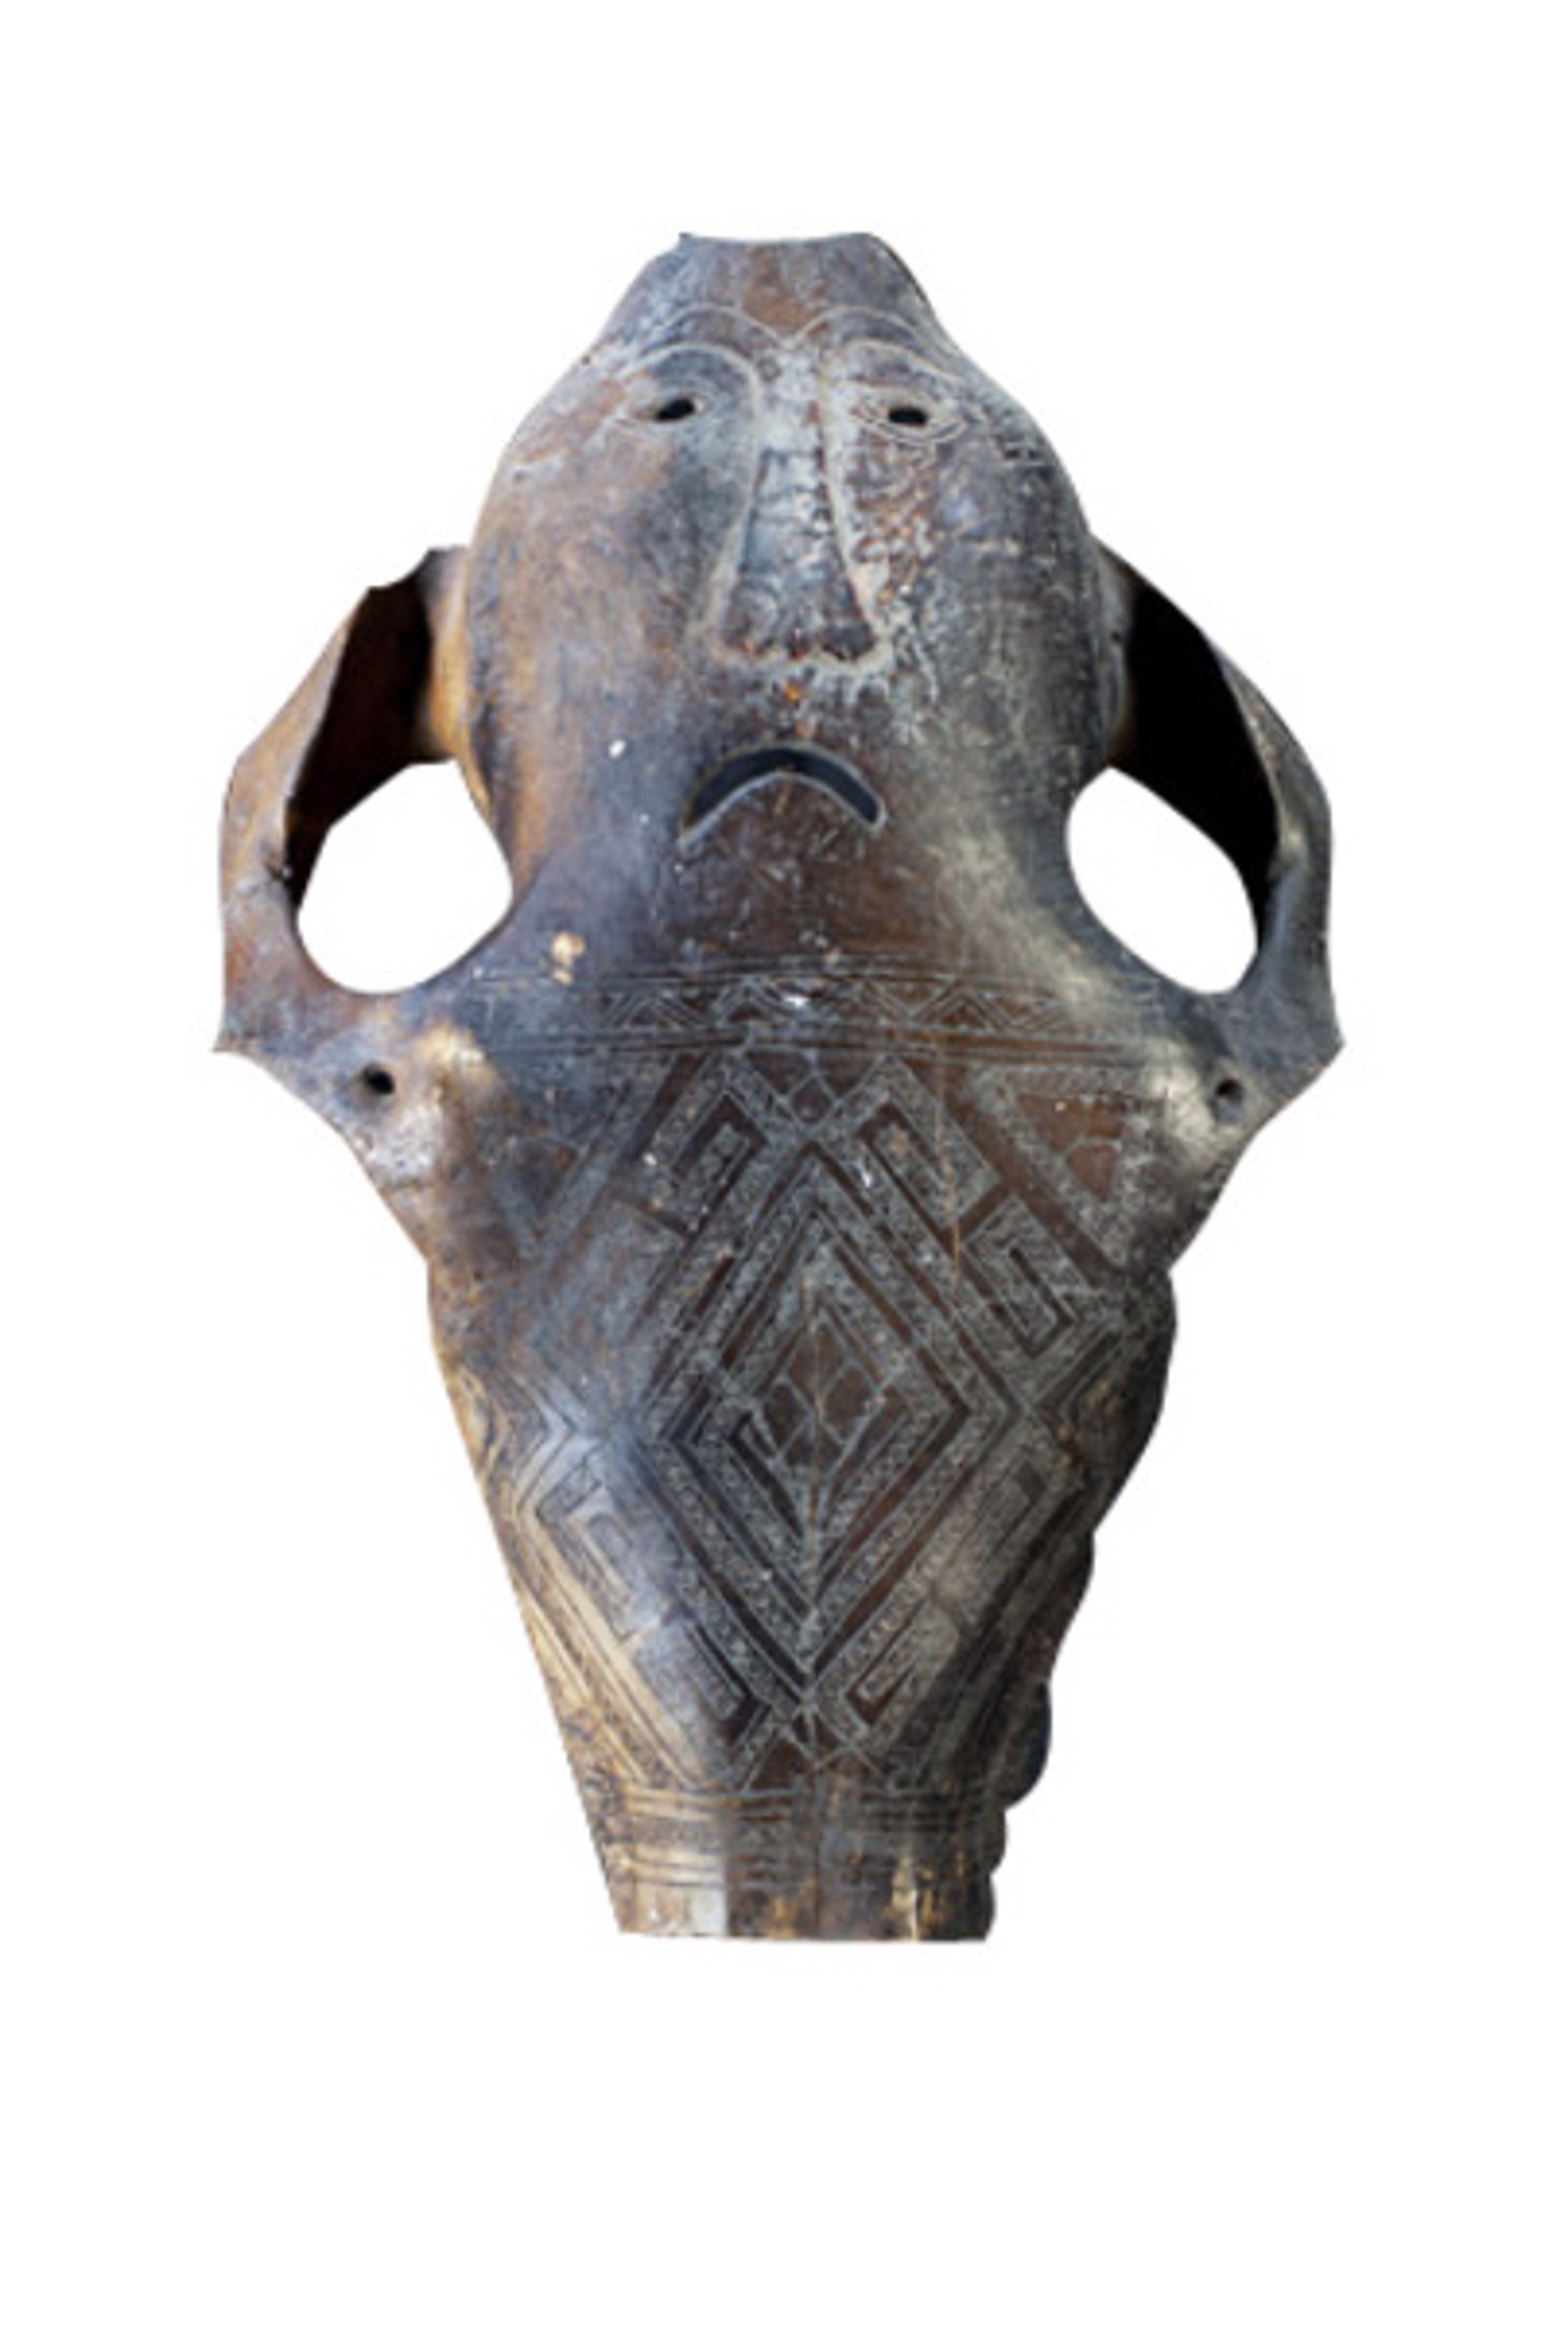 Timor Protective Mask by Indonesian